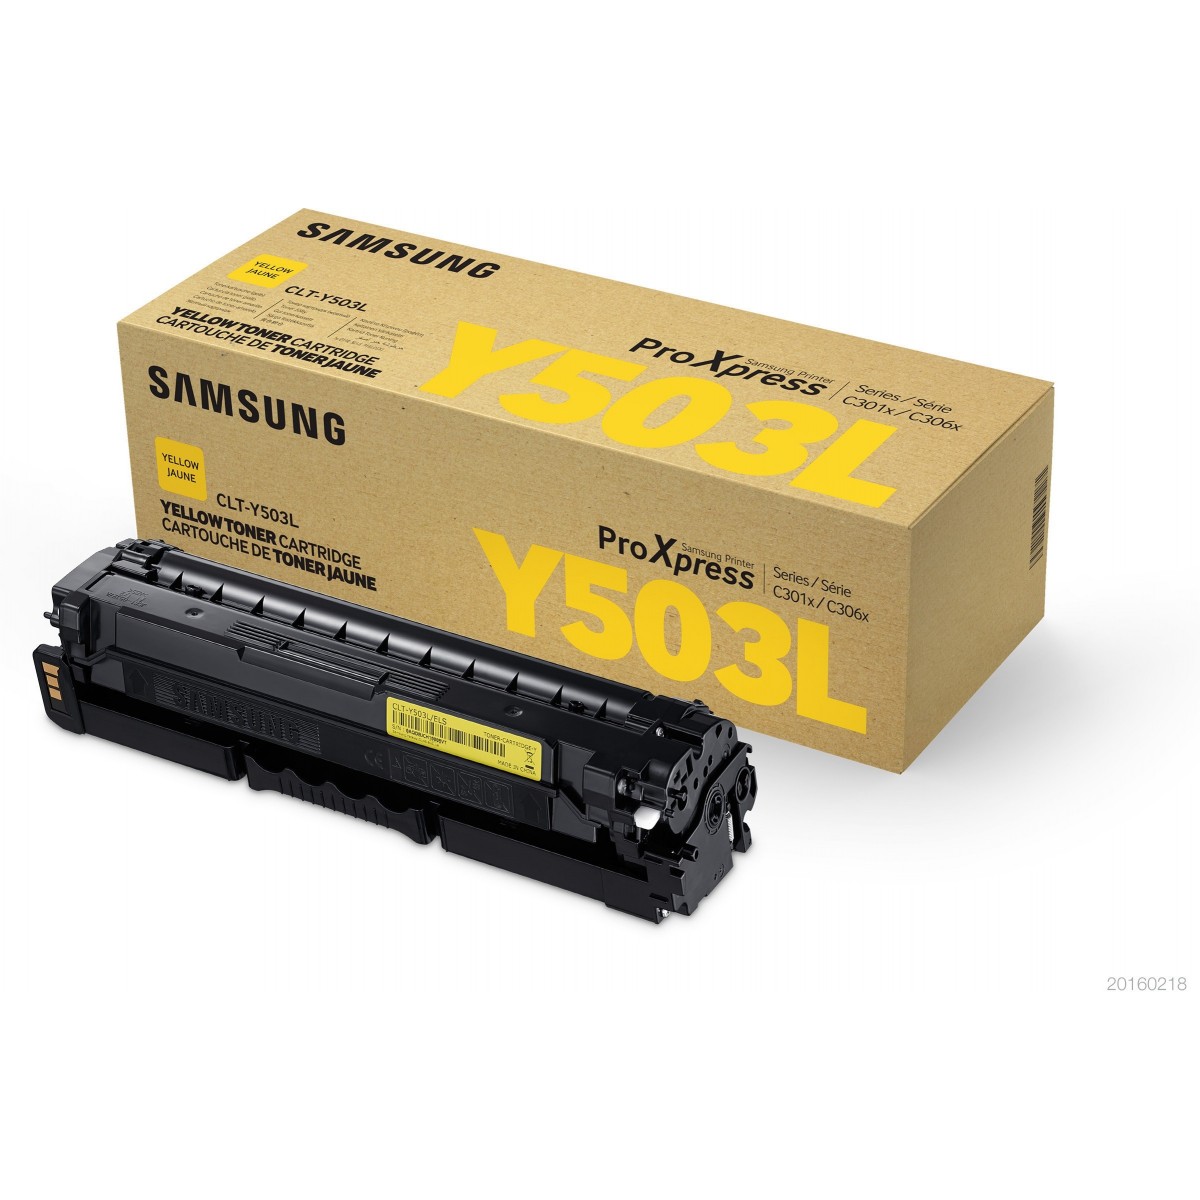 HP CLT-Y503L High Yield Yellow Toner Cartridge - 5000 pages - Yellow - 1 pc(s)